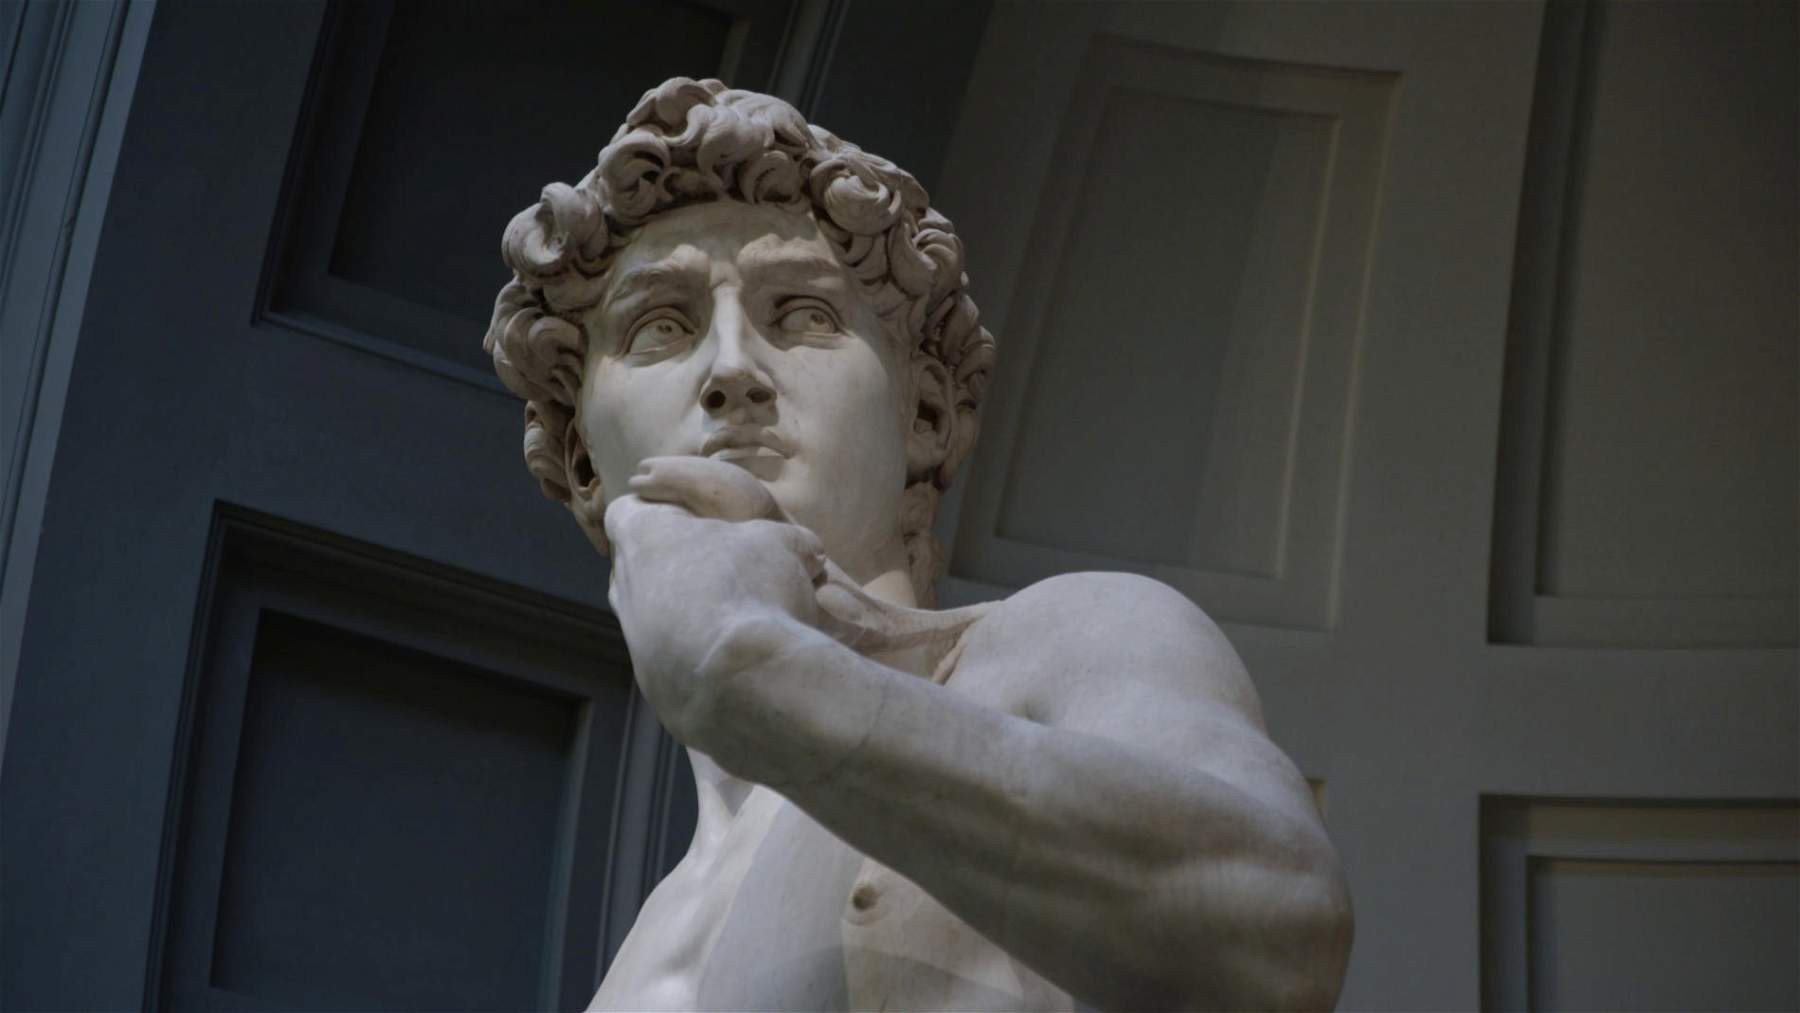 David's sculptures in Florence: a documentary chronicles all the Davids in Tuscany's capital city